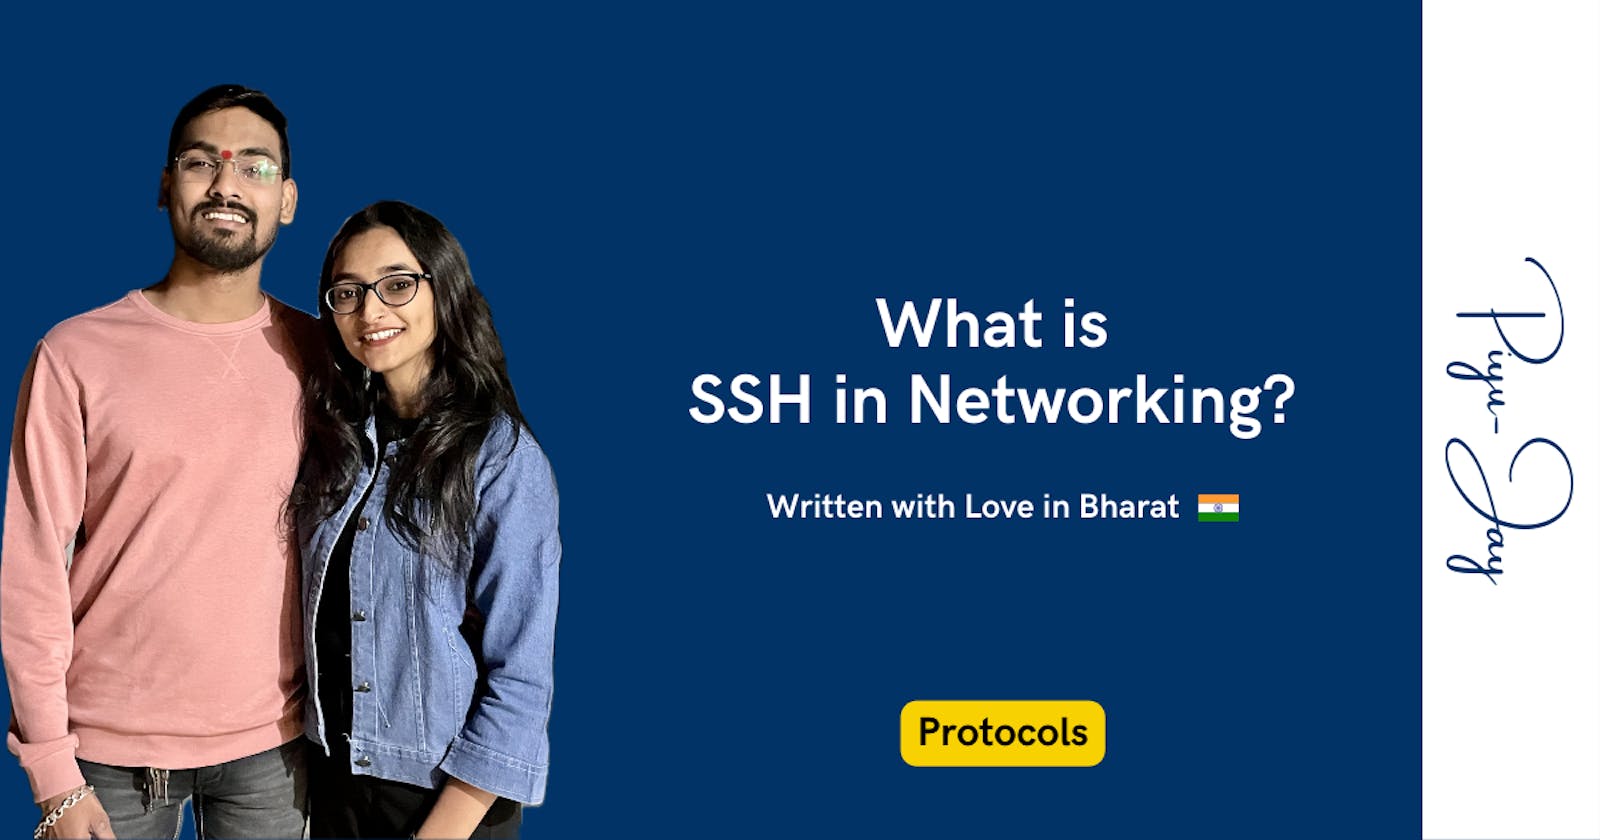 What is SSH in Networking?